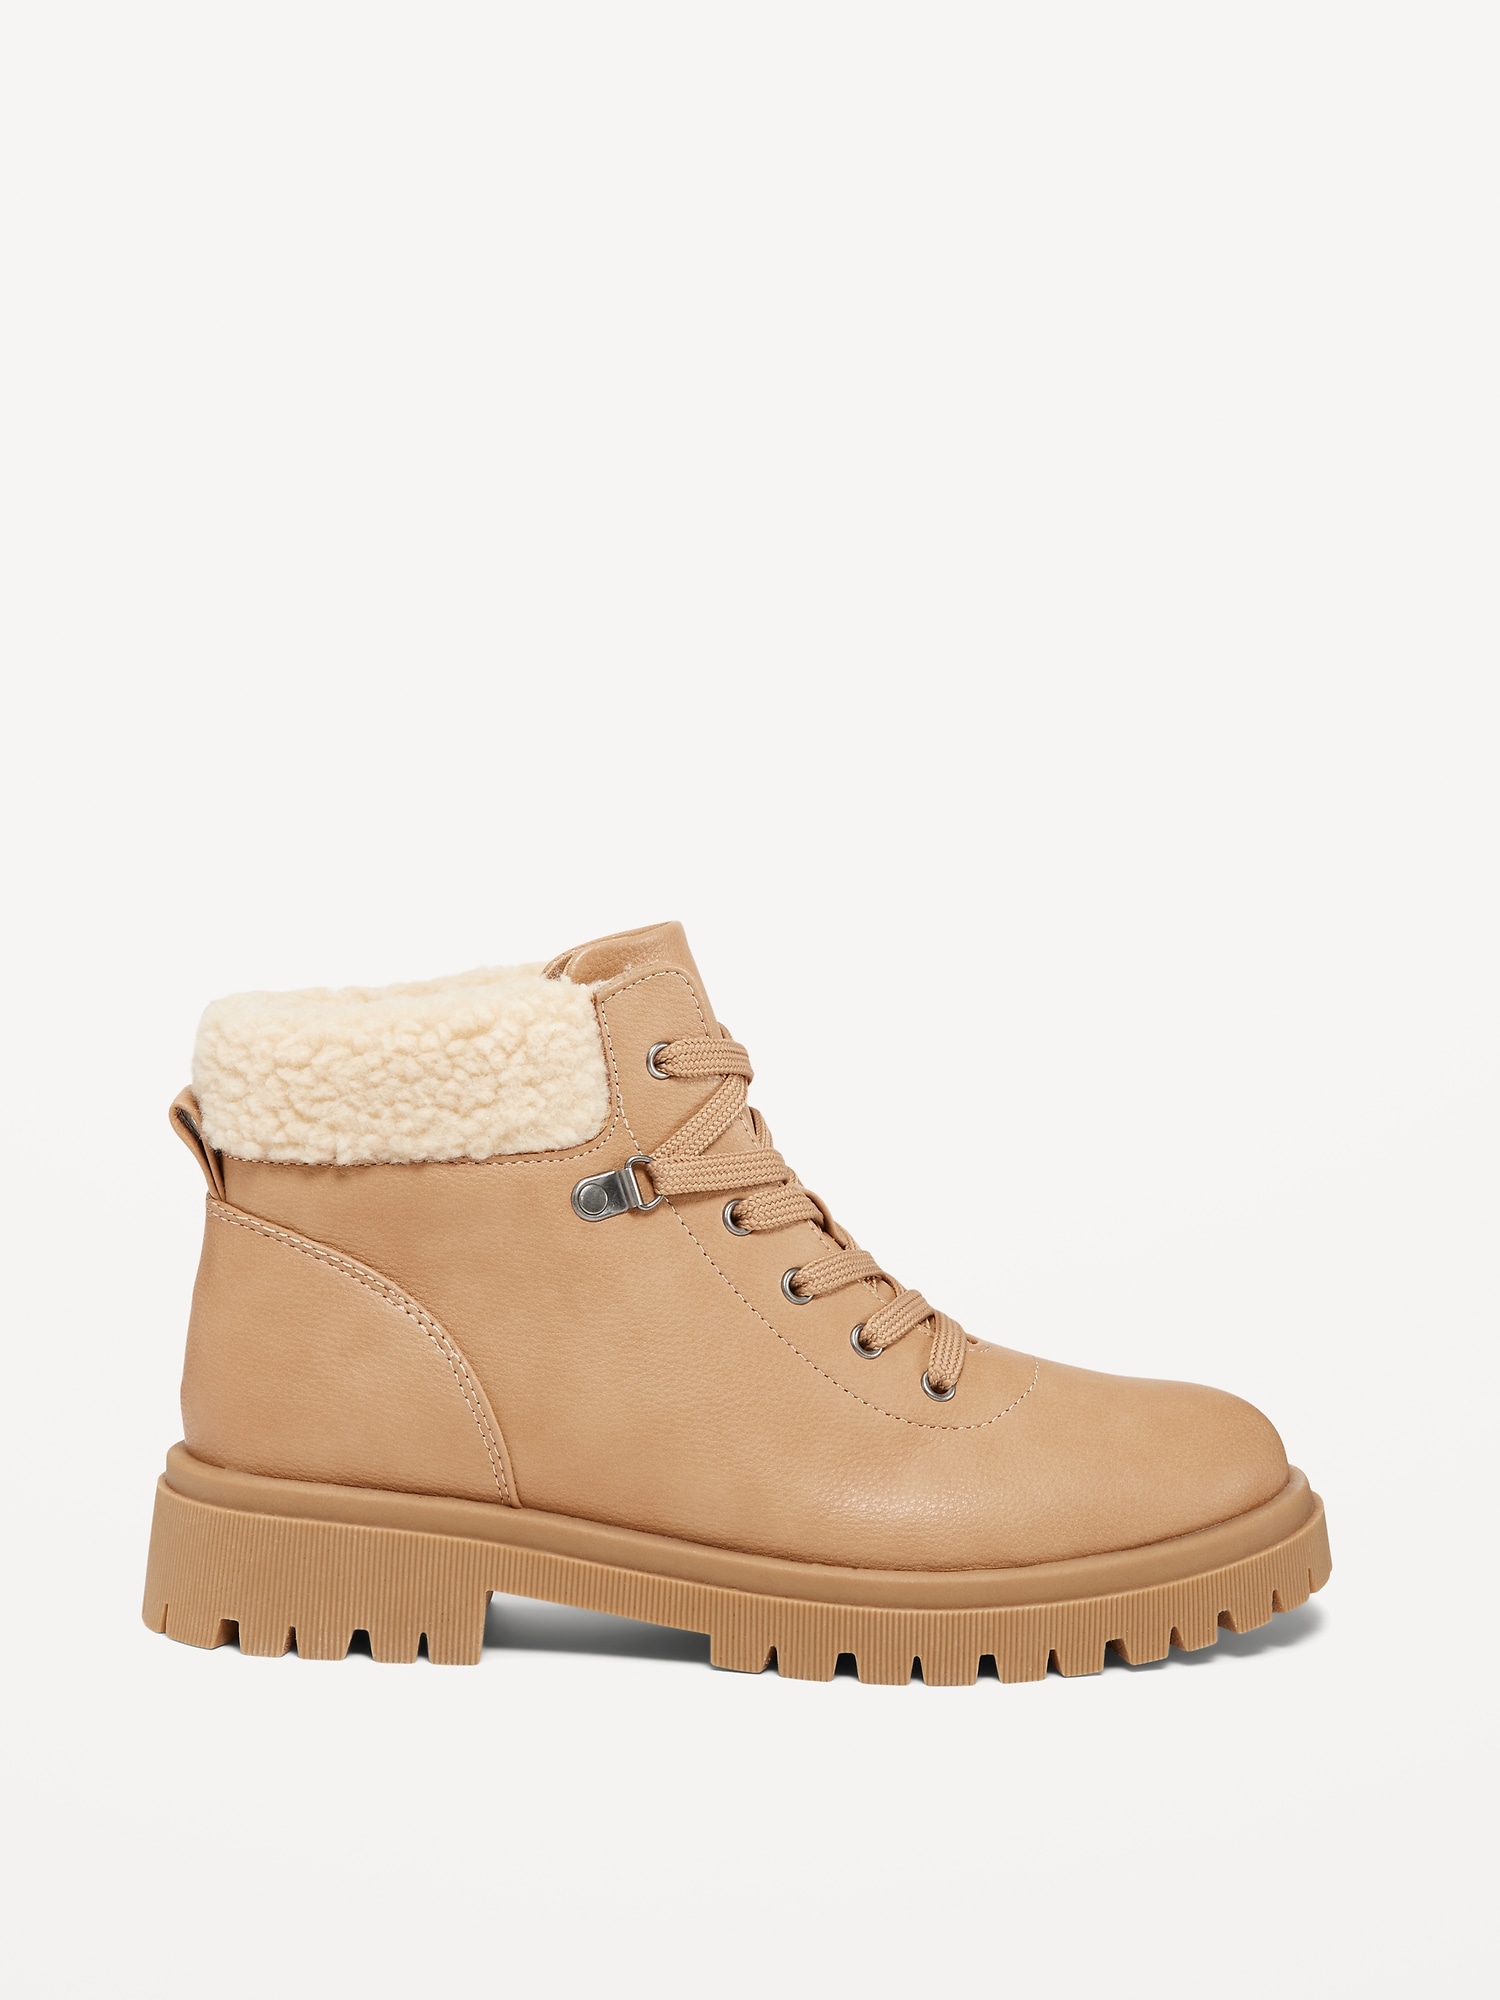 Faux Leather Hiking Boot | Old Navy